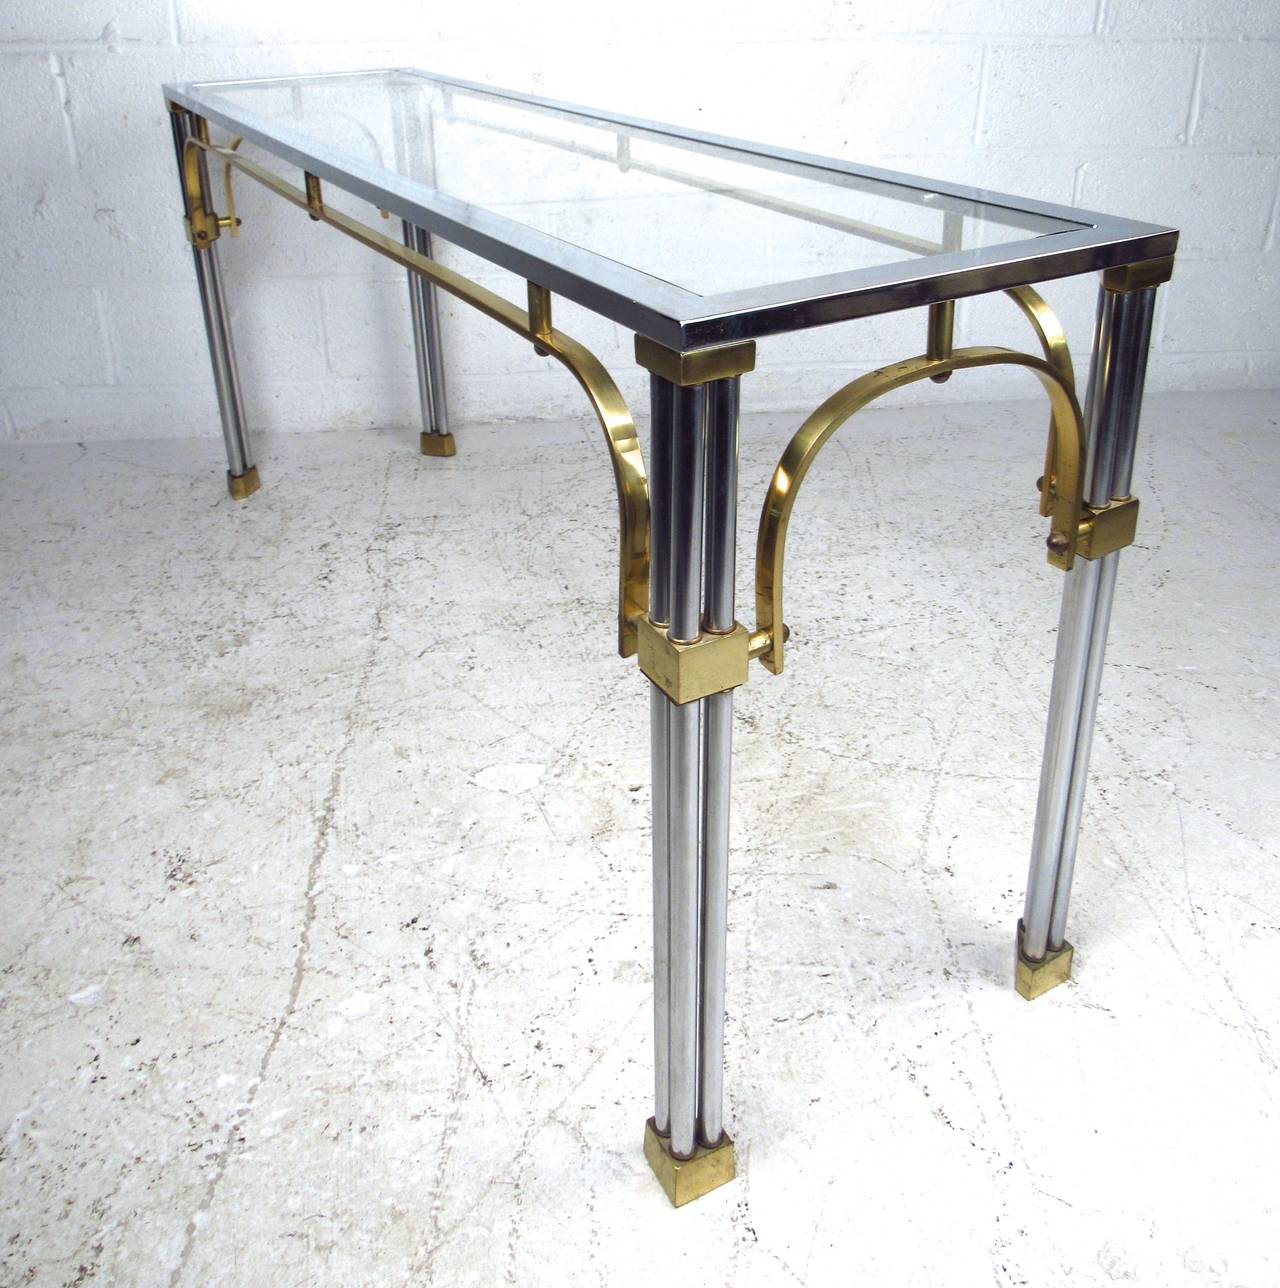 This beautiful vintage hall table features a sturdy chrome frame with ornate brass trim. Perfect size for use behind a sofa or as an entryway table. Wonderfully designed with elements of Maison Jansen and Romeo Rega. Please confirm item location (NY